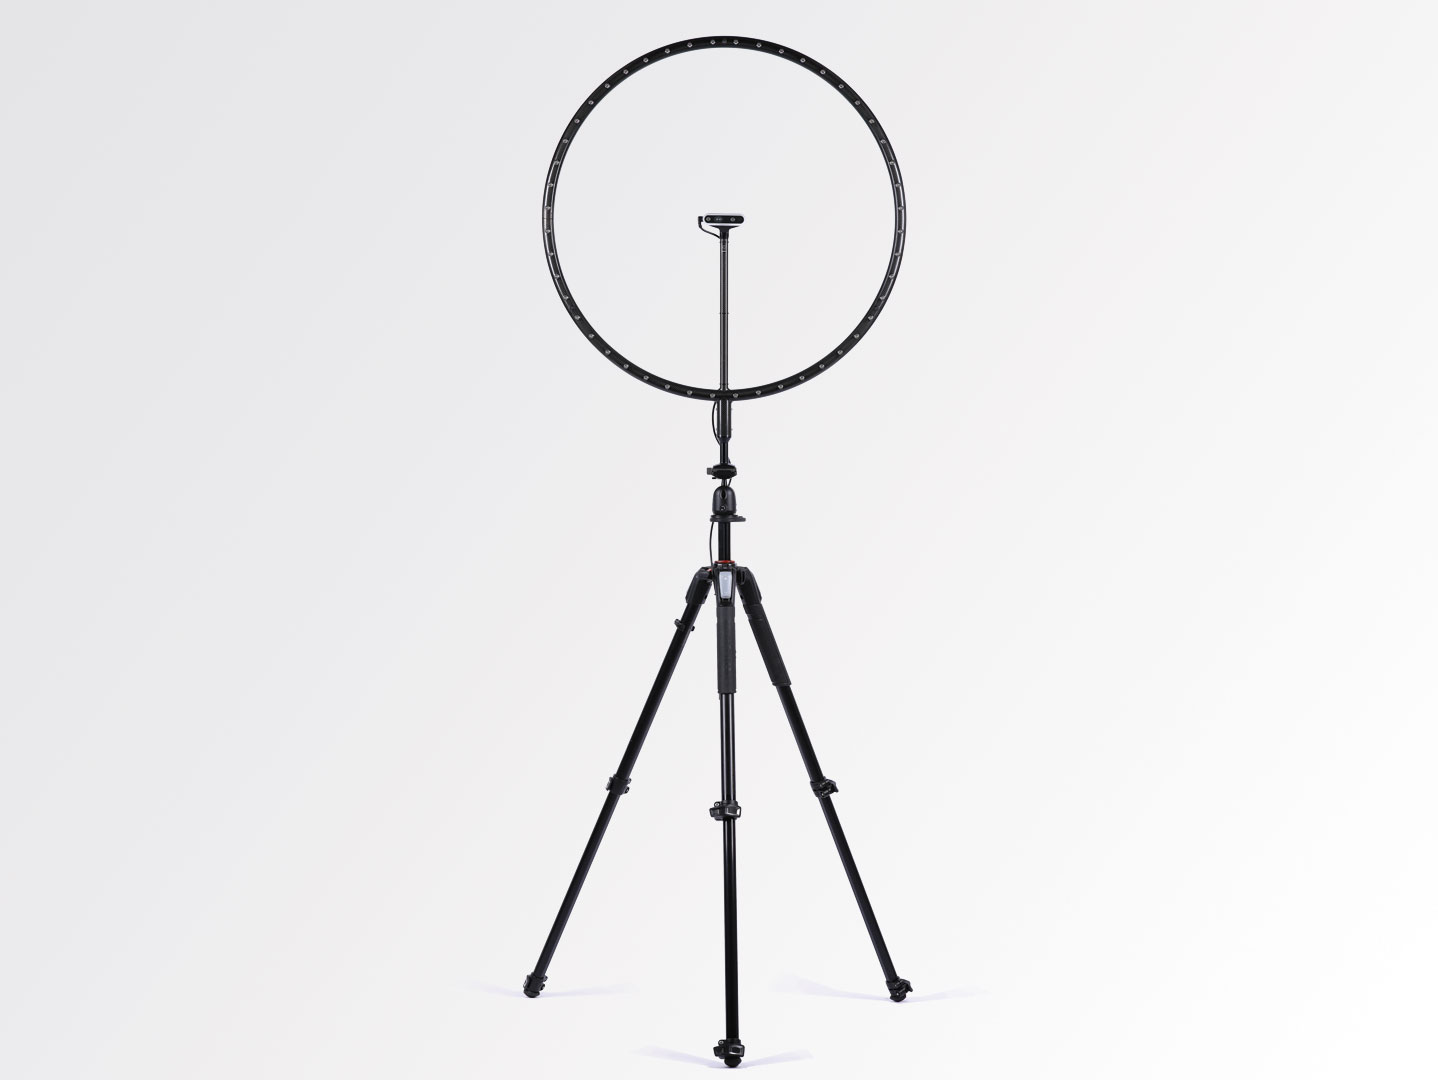 Beamforming microphone array Ring48 AC Pro on a tripod